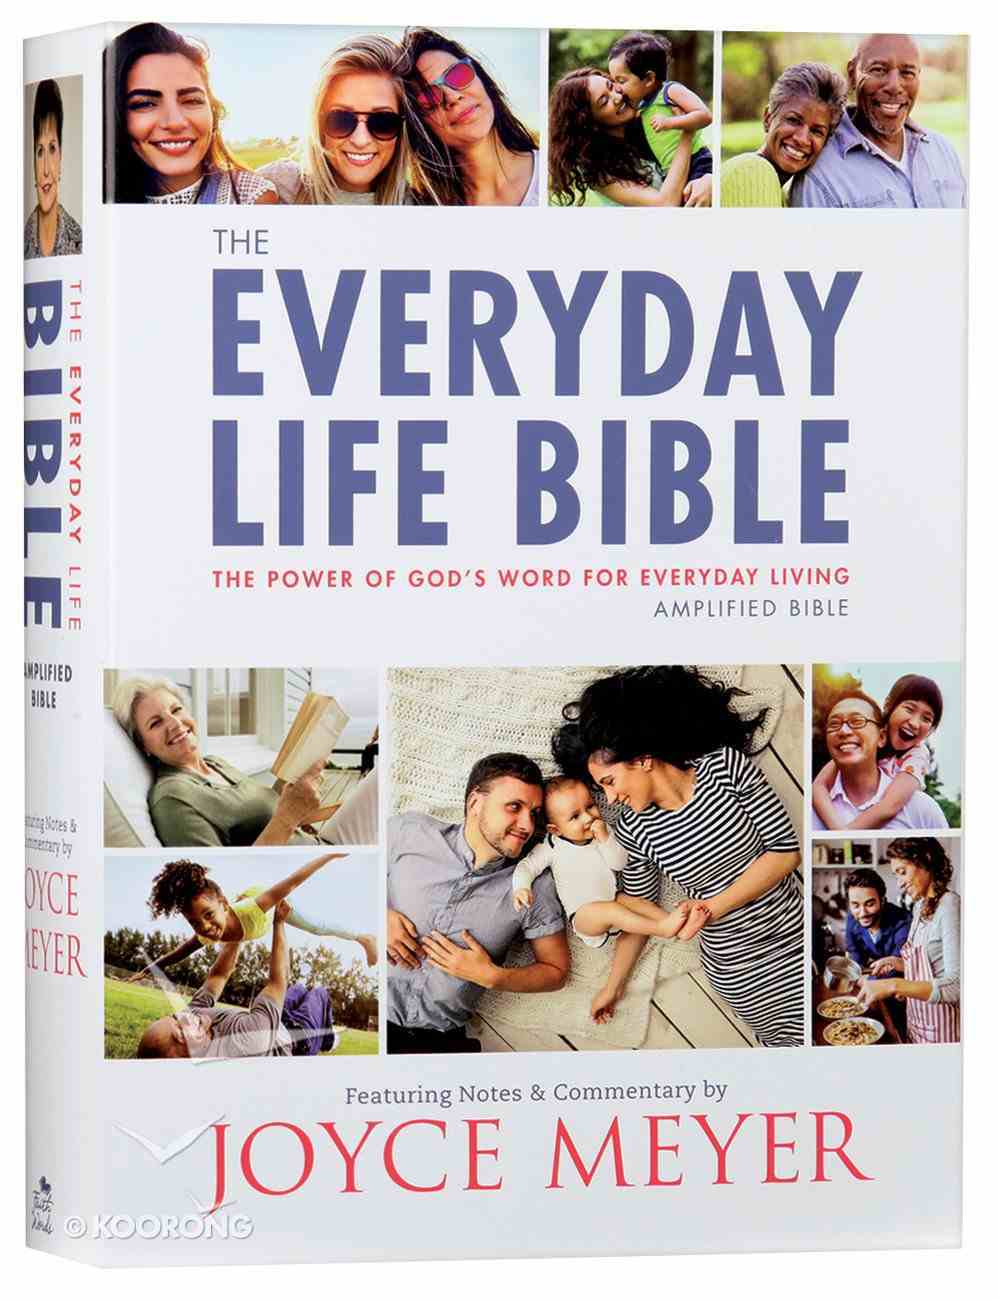 The Amplified New Everyday Life Bible Paperback